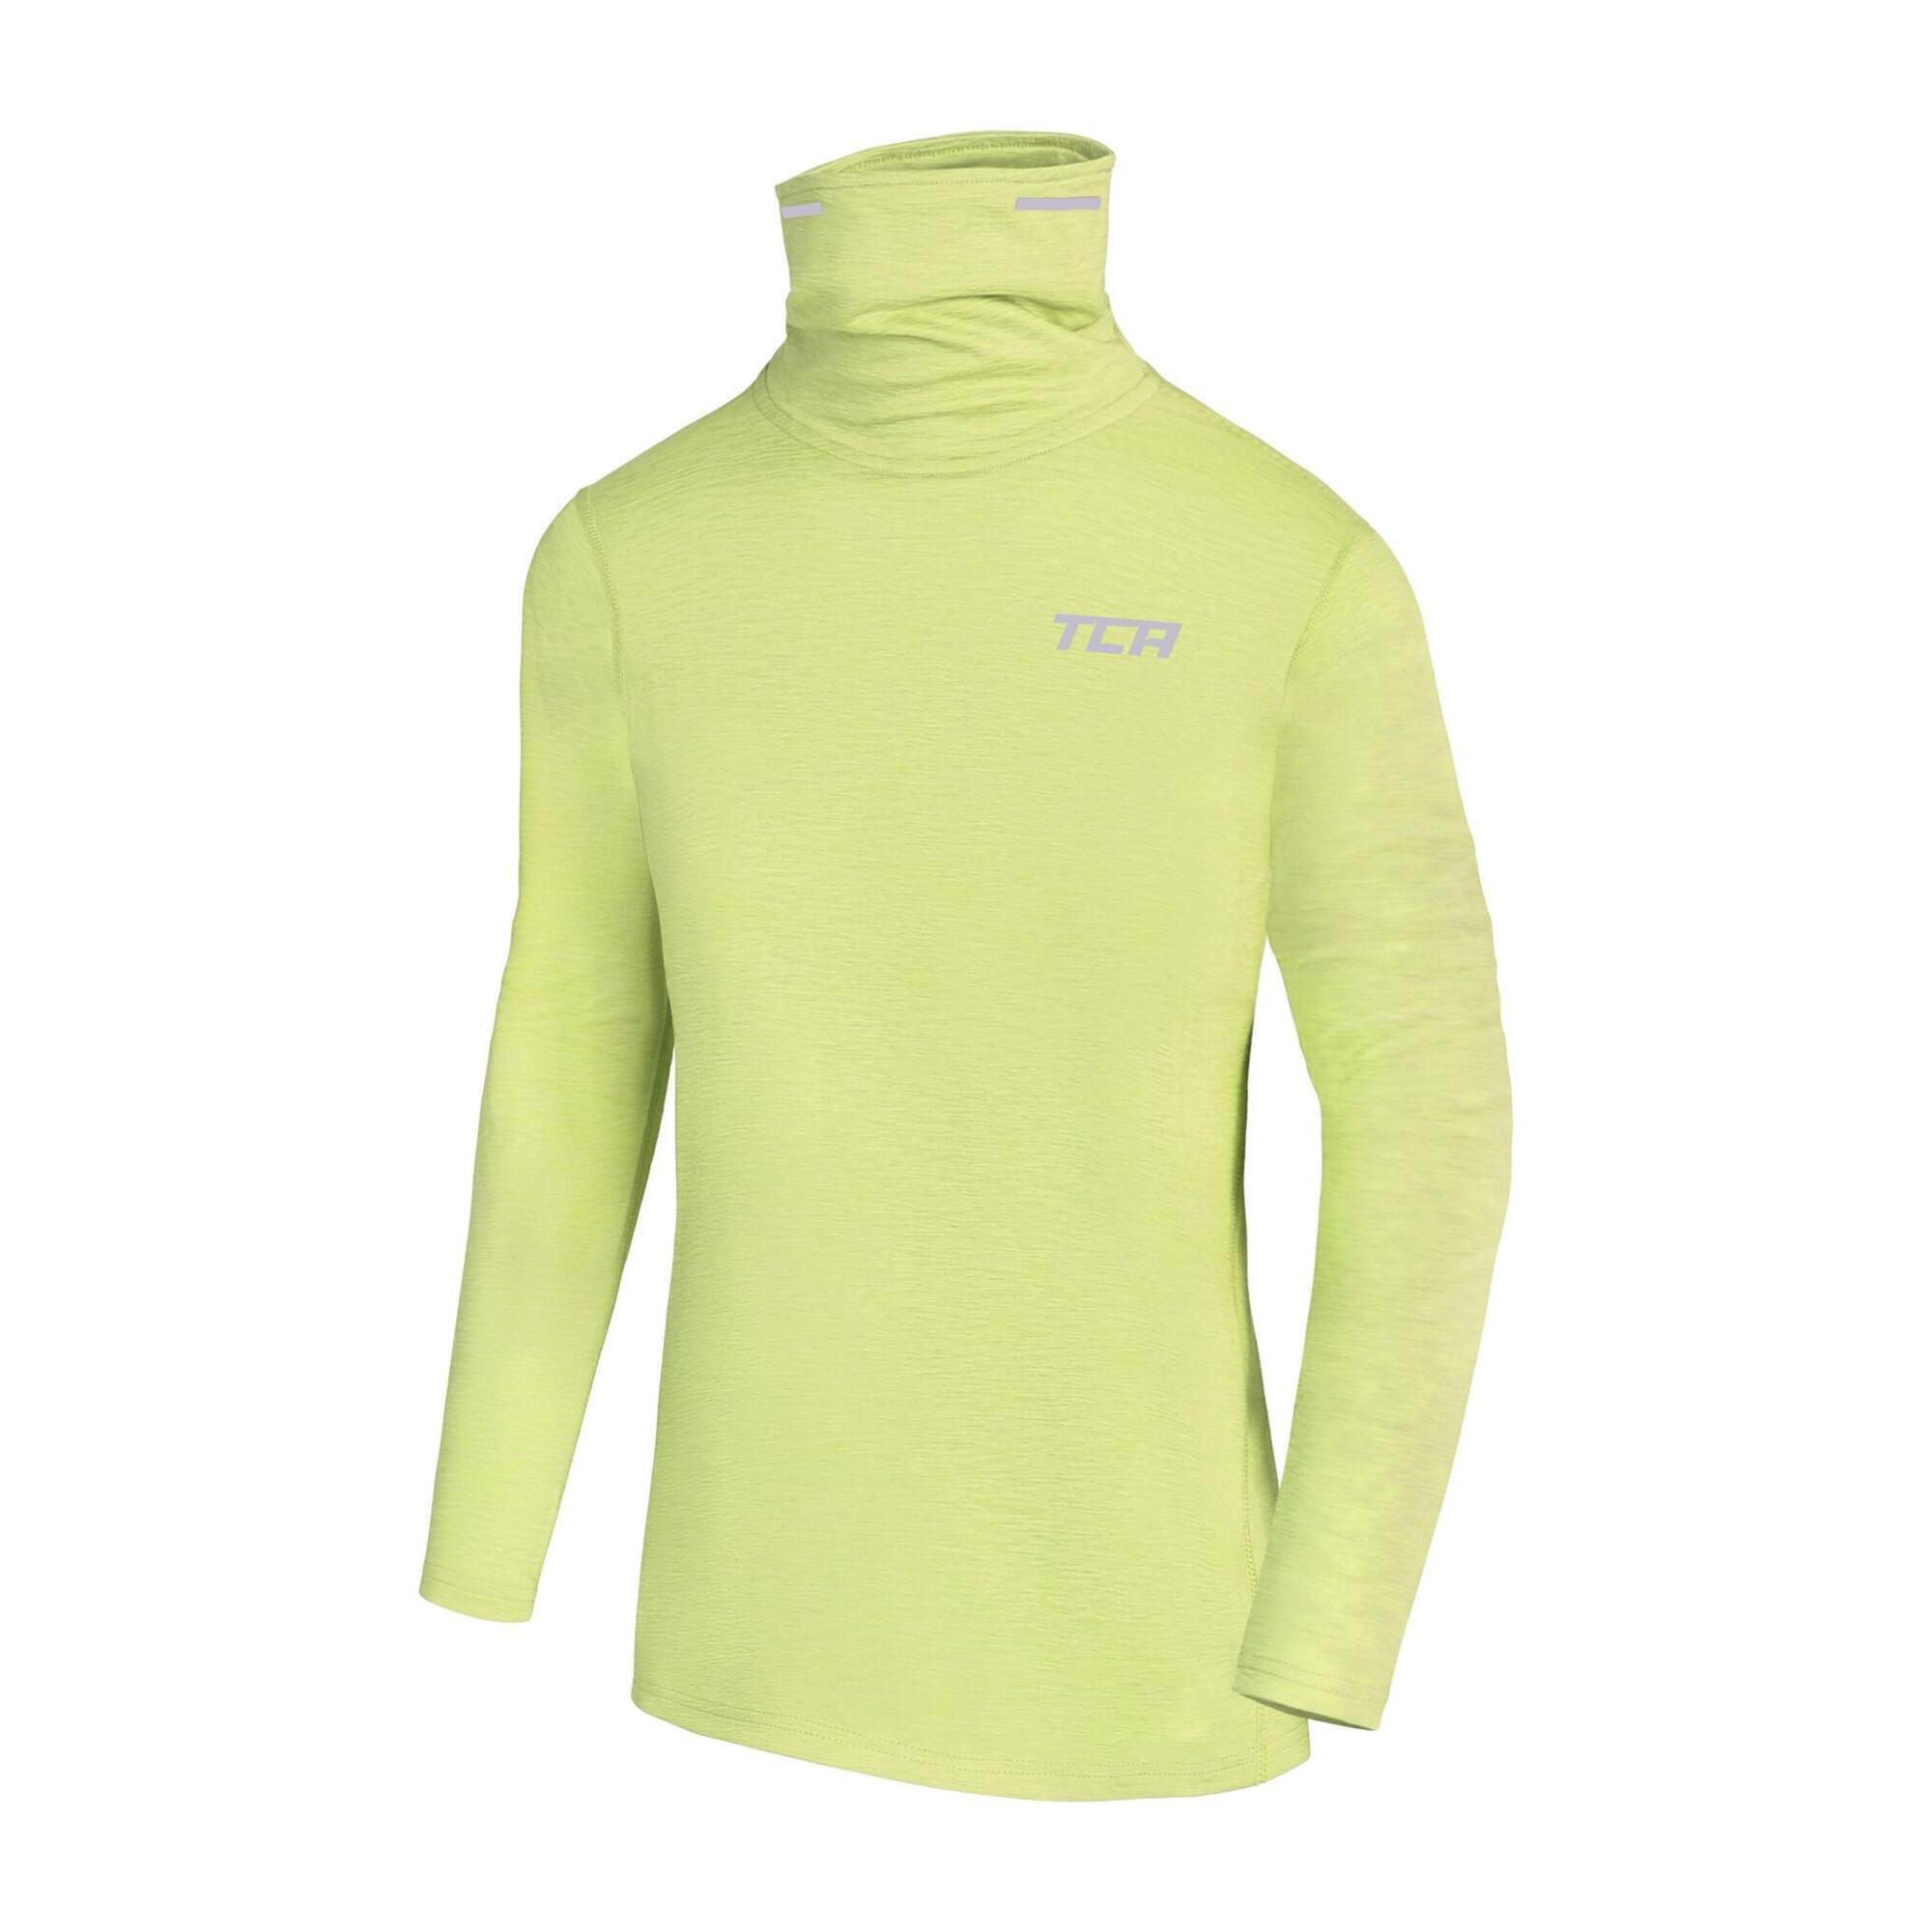 TCA Boy’s Thermal Funnel Neck Top - Lime Punch